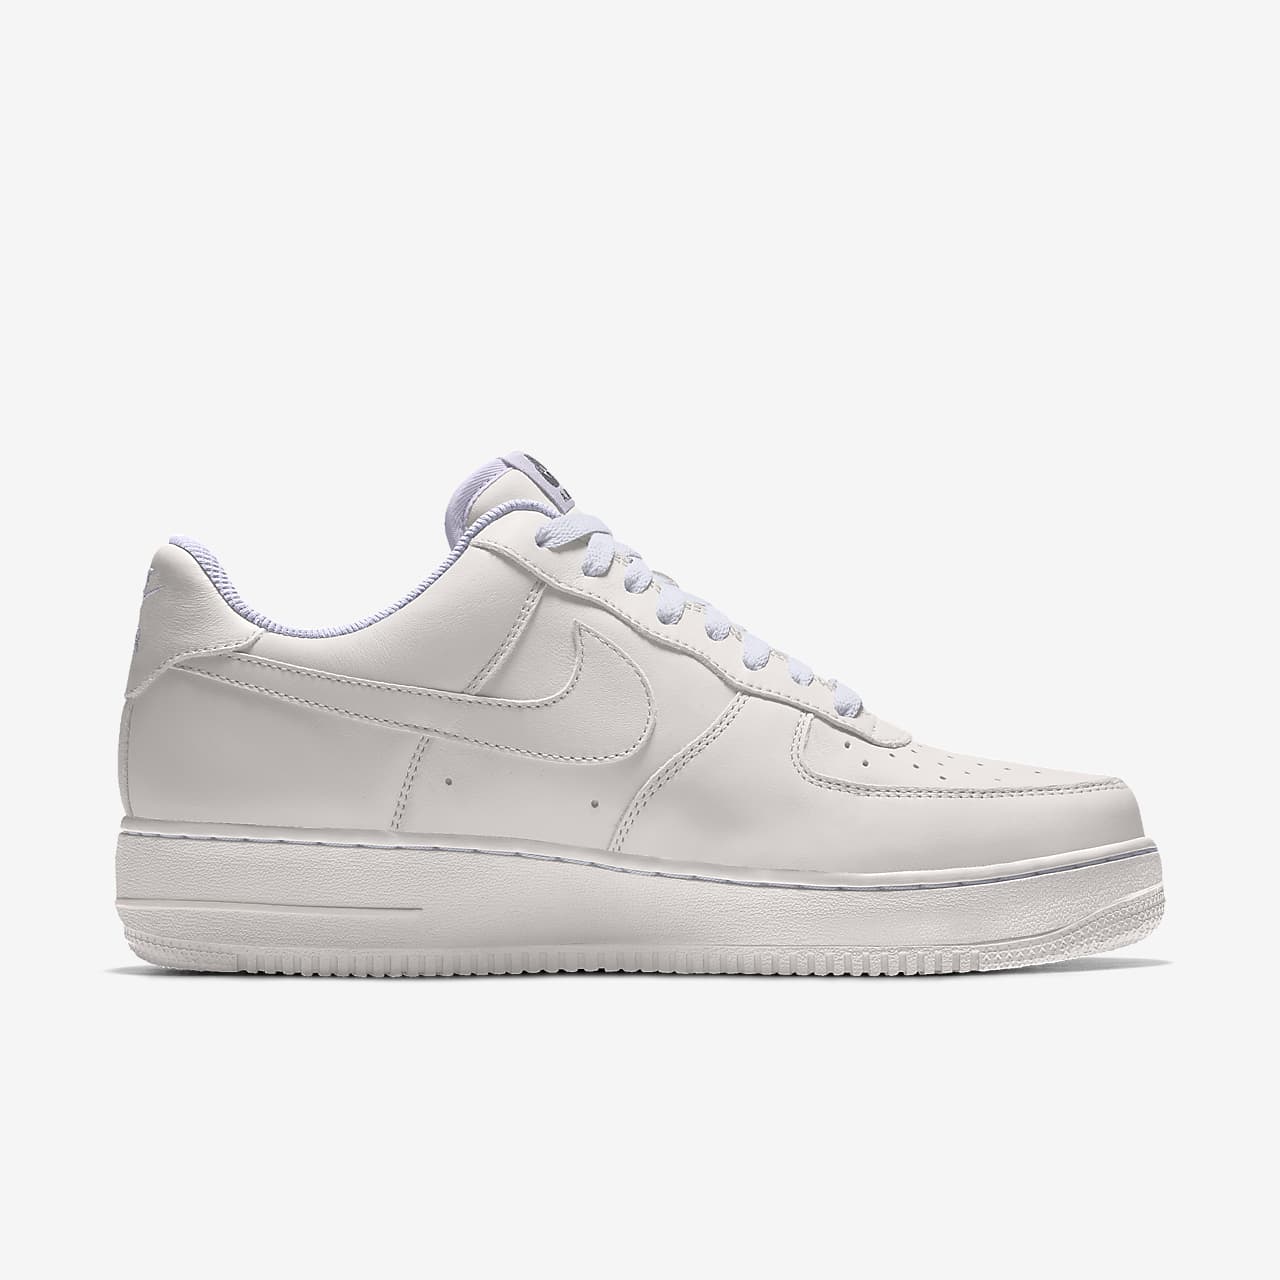 nike air force 1 ripple leather